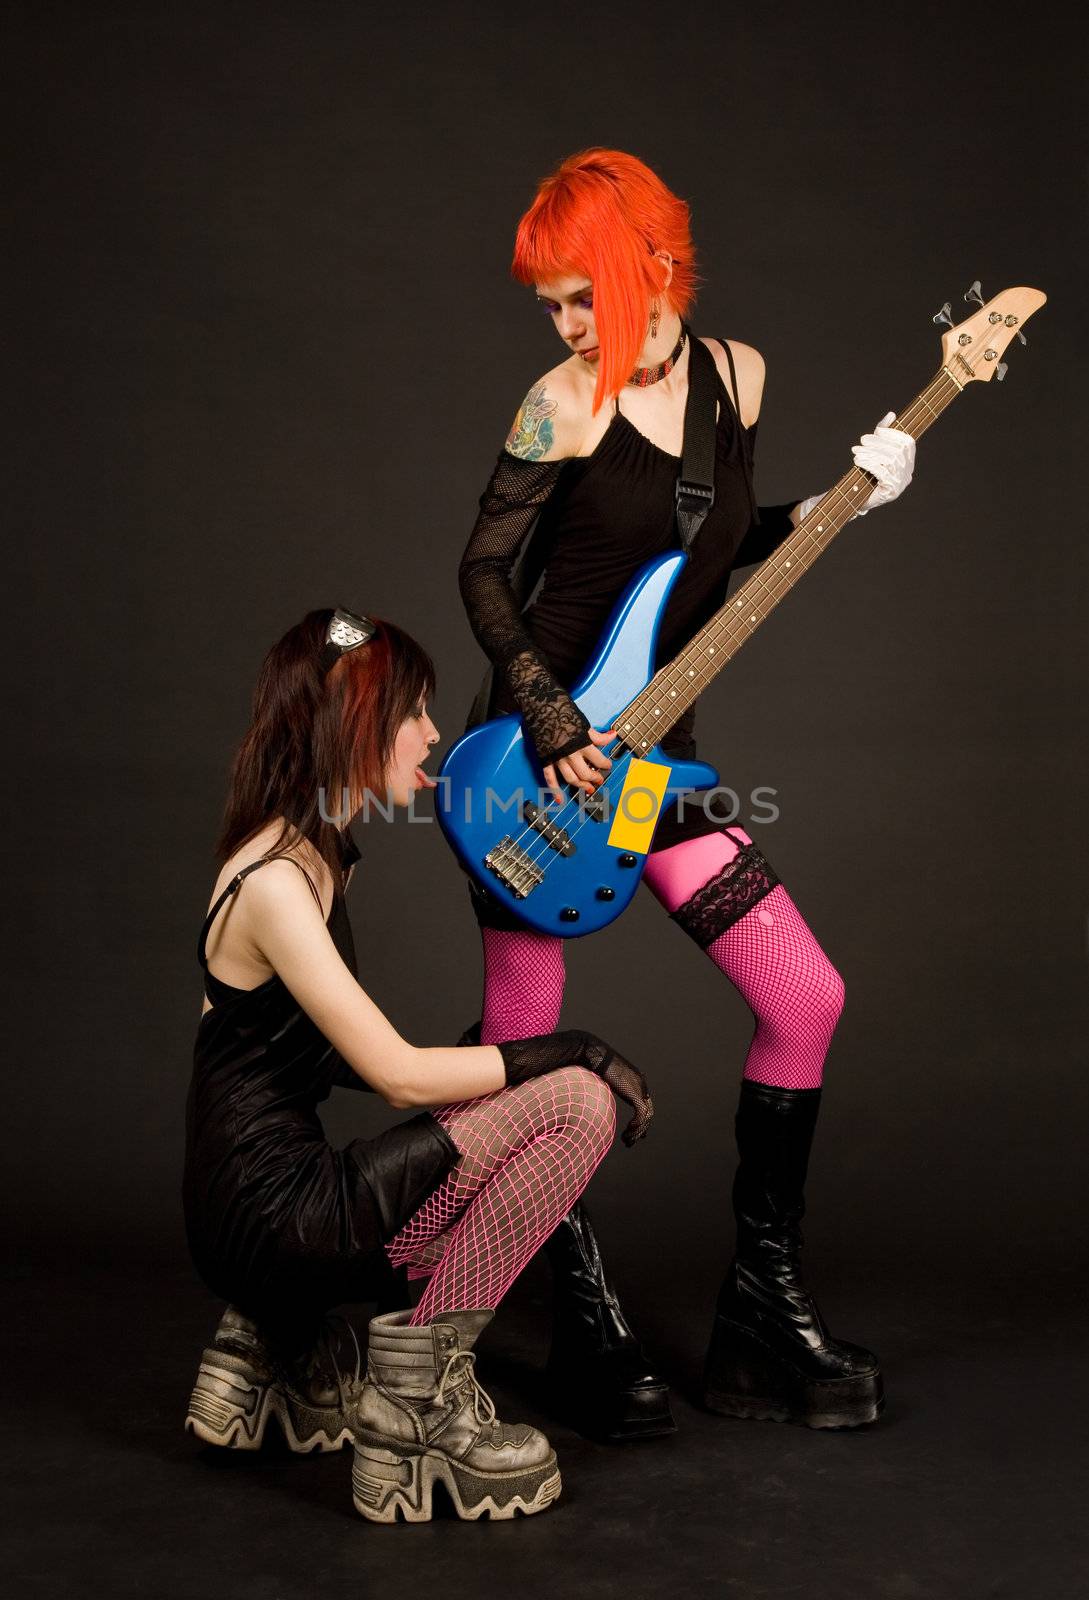 Two rock girls, one of them licking guitar by Elisanth